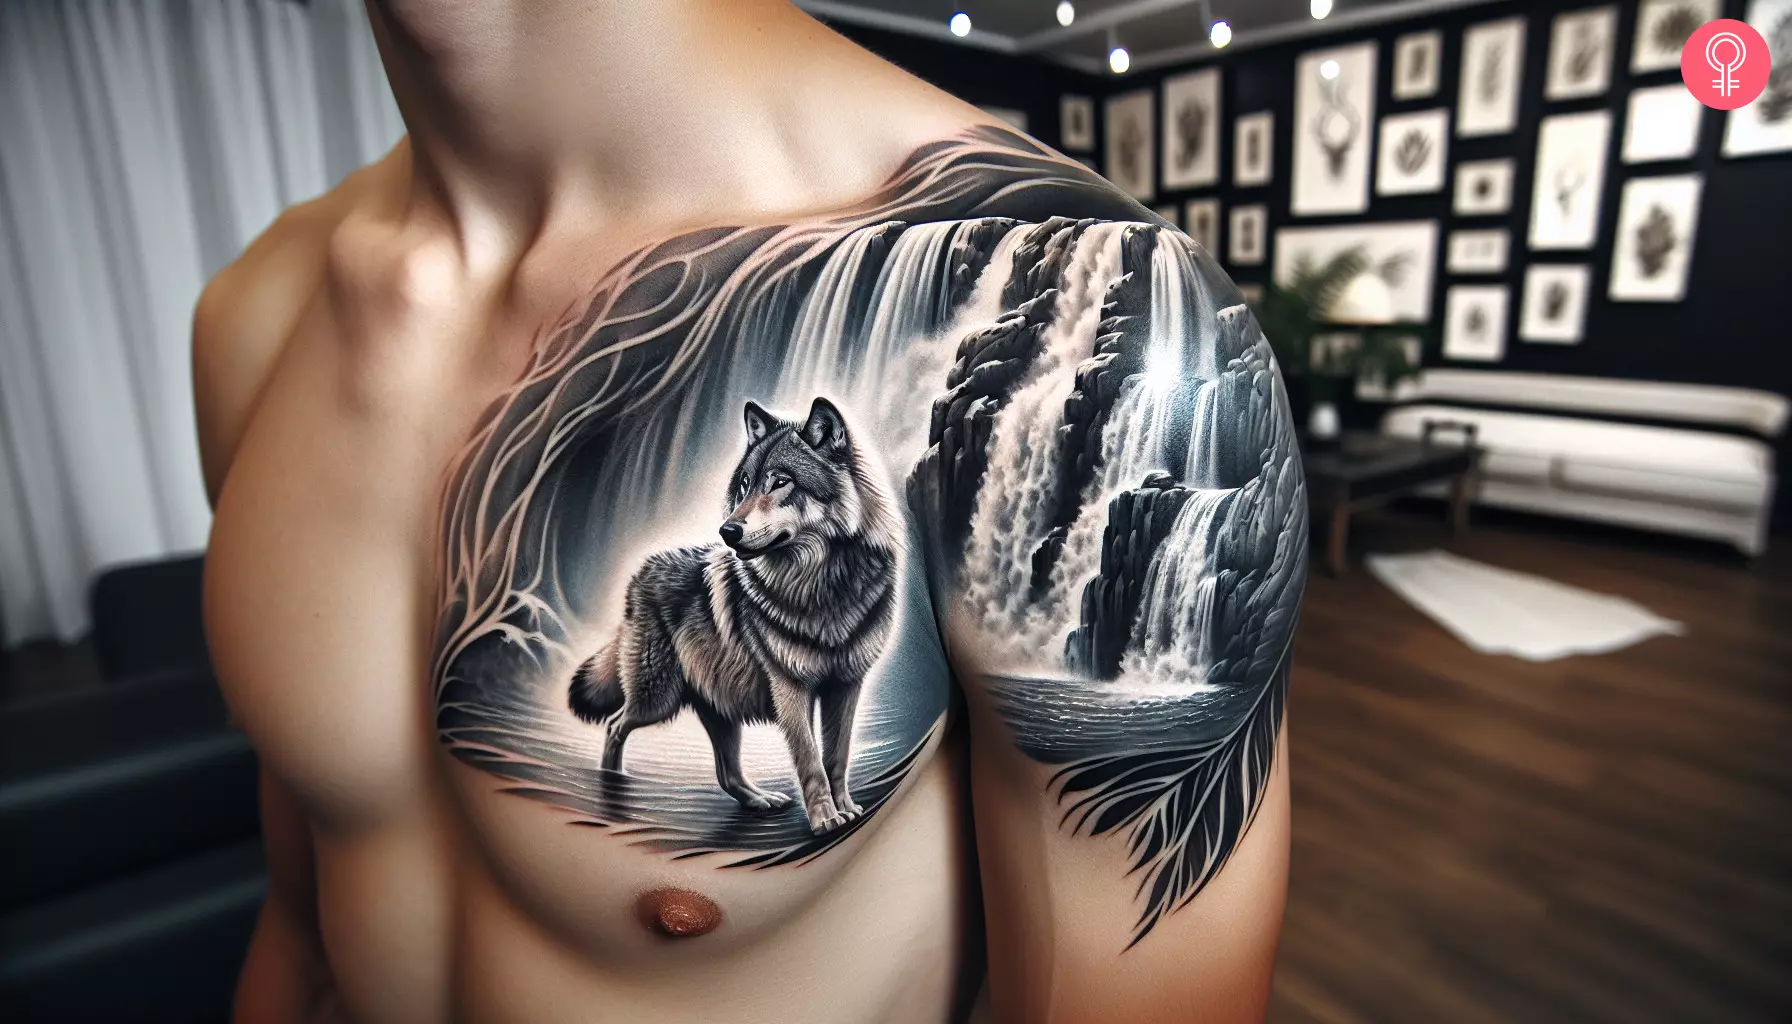 A wolf waterfall tattoo on the shoulder of a man